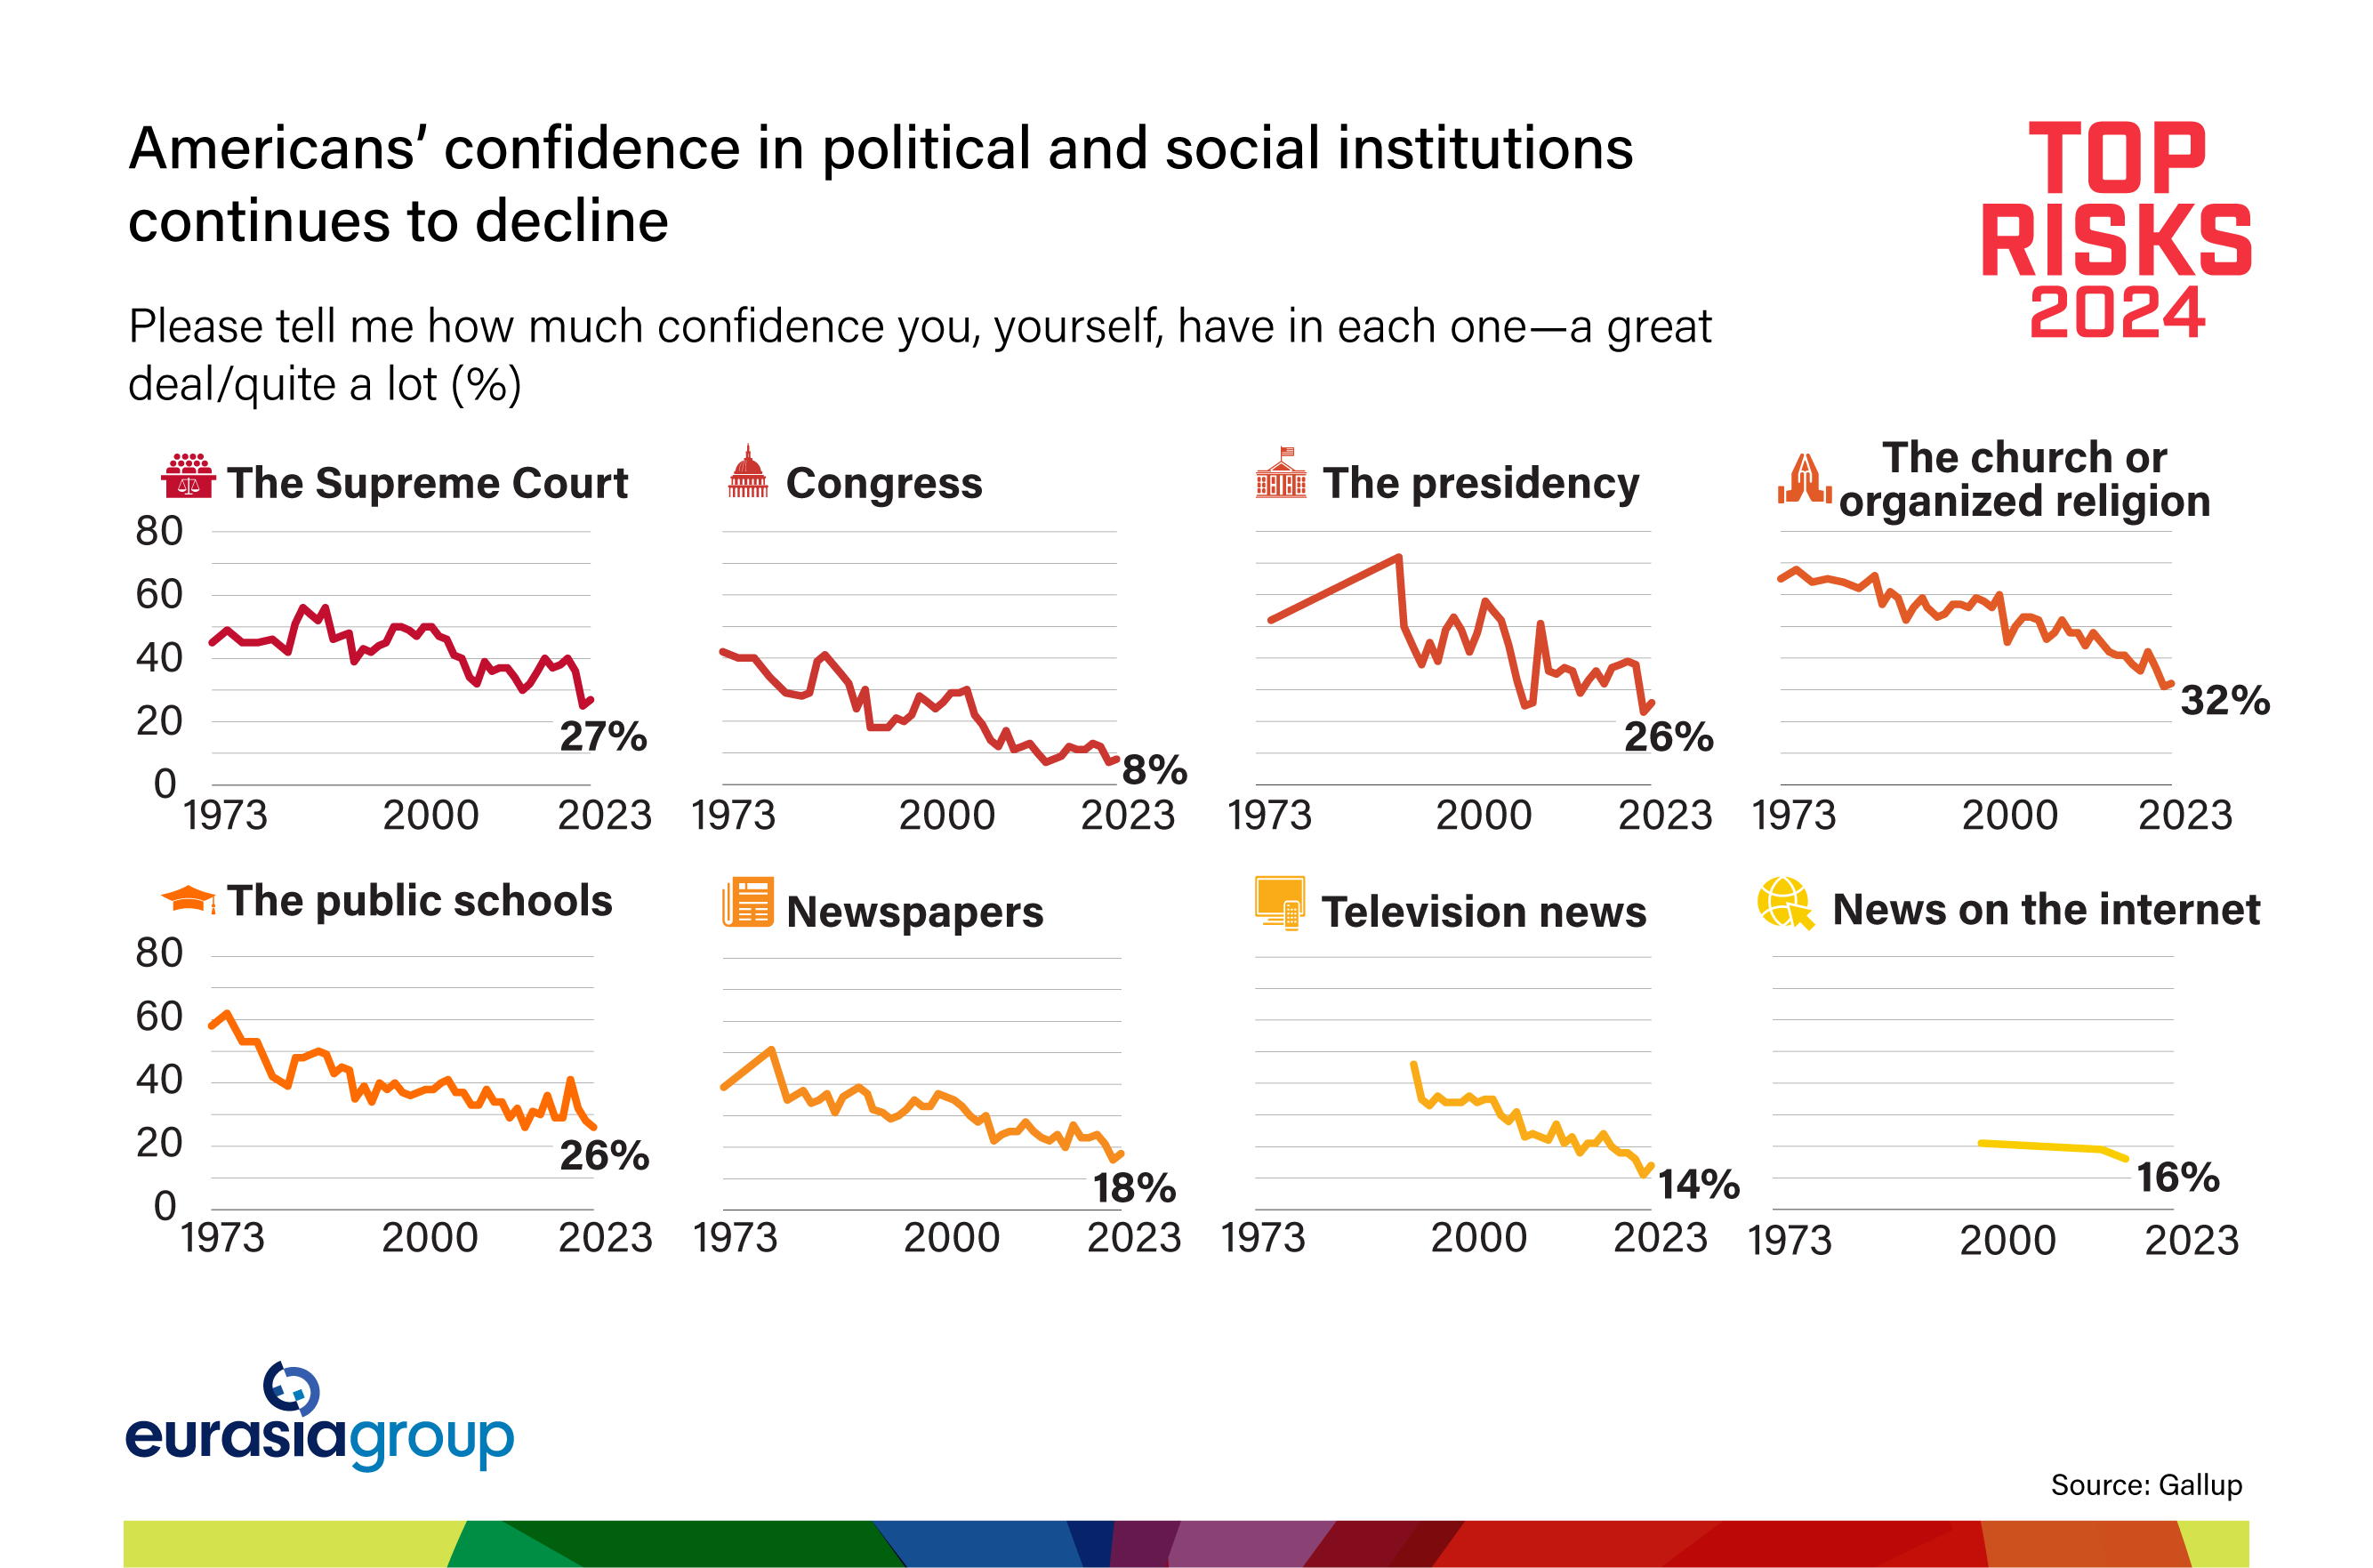 Americans' confidence in political and social institutions continues to decline